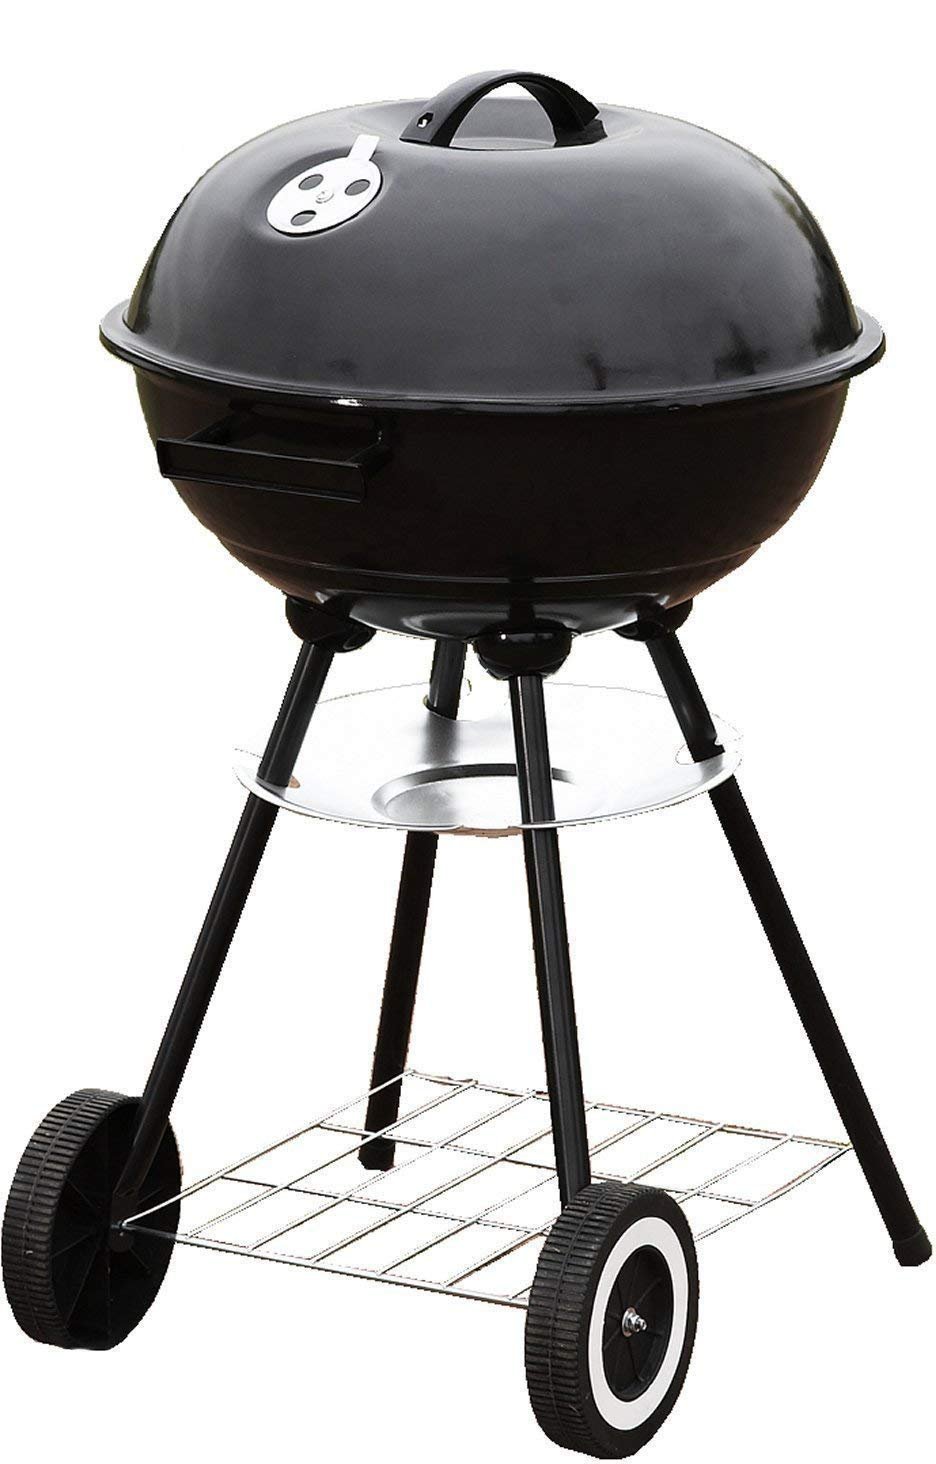 Portable 18" Charcoal Grill Outdoor Original BBQ Grill Backyard Cooking Stainless Steel 18 diameter cooking space cook steaks, burgers, Backyard & Tailgate - image 1 of 5